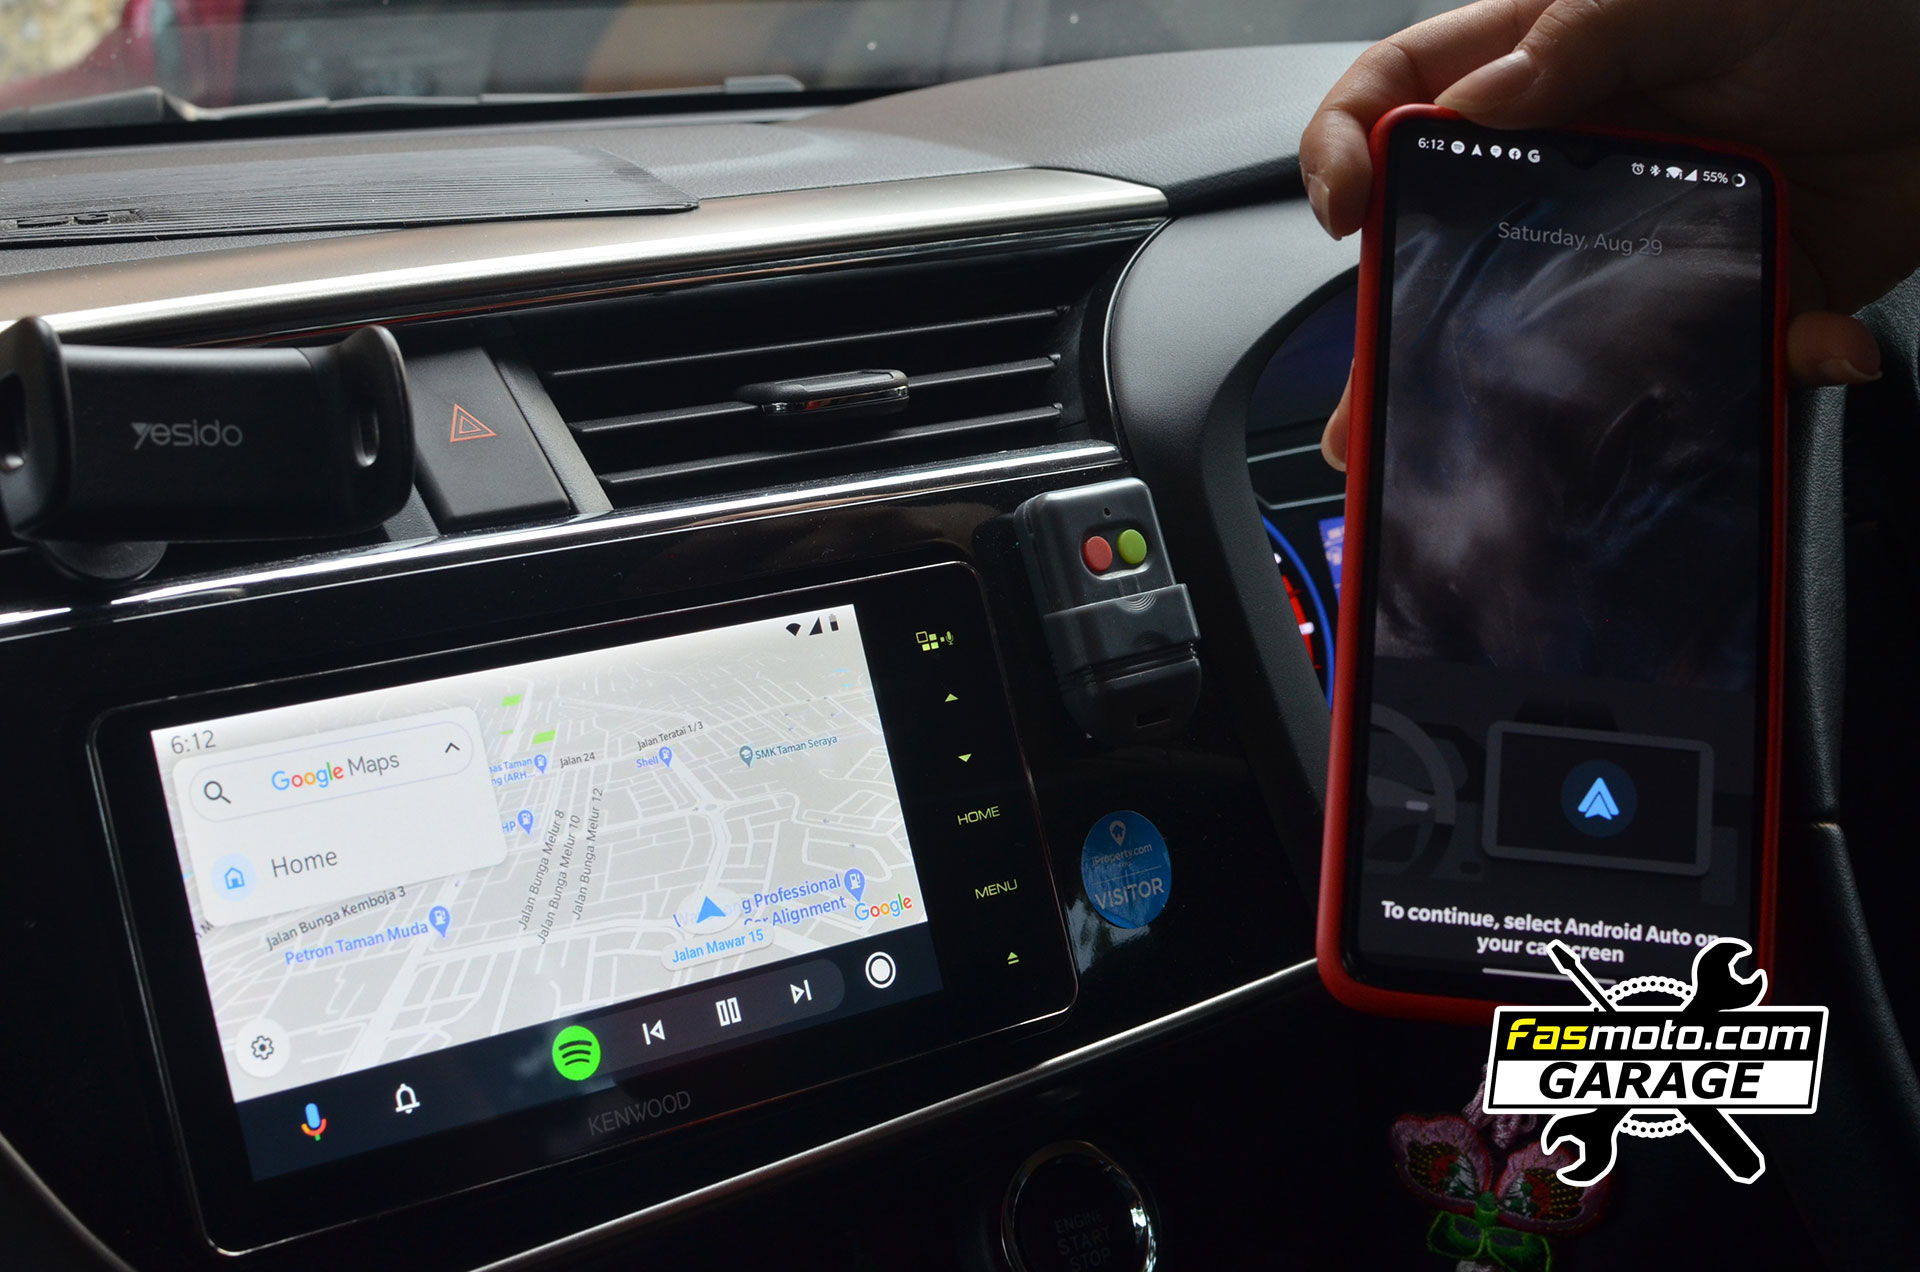 Does Android Auto work wirelessly on the DDX919WS